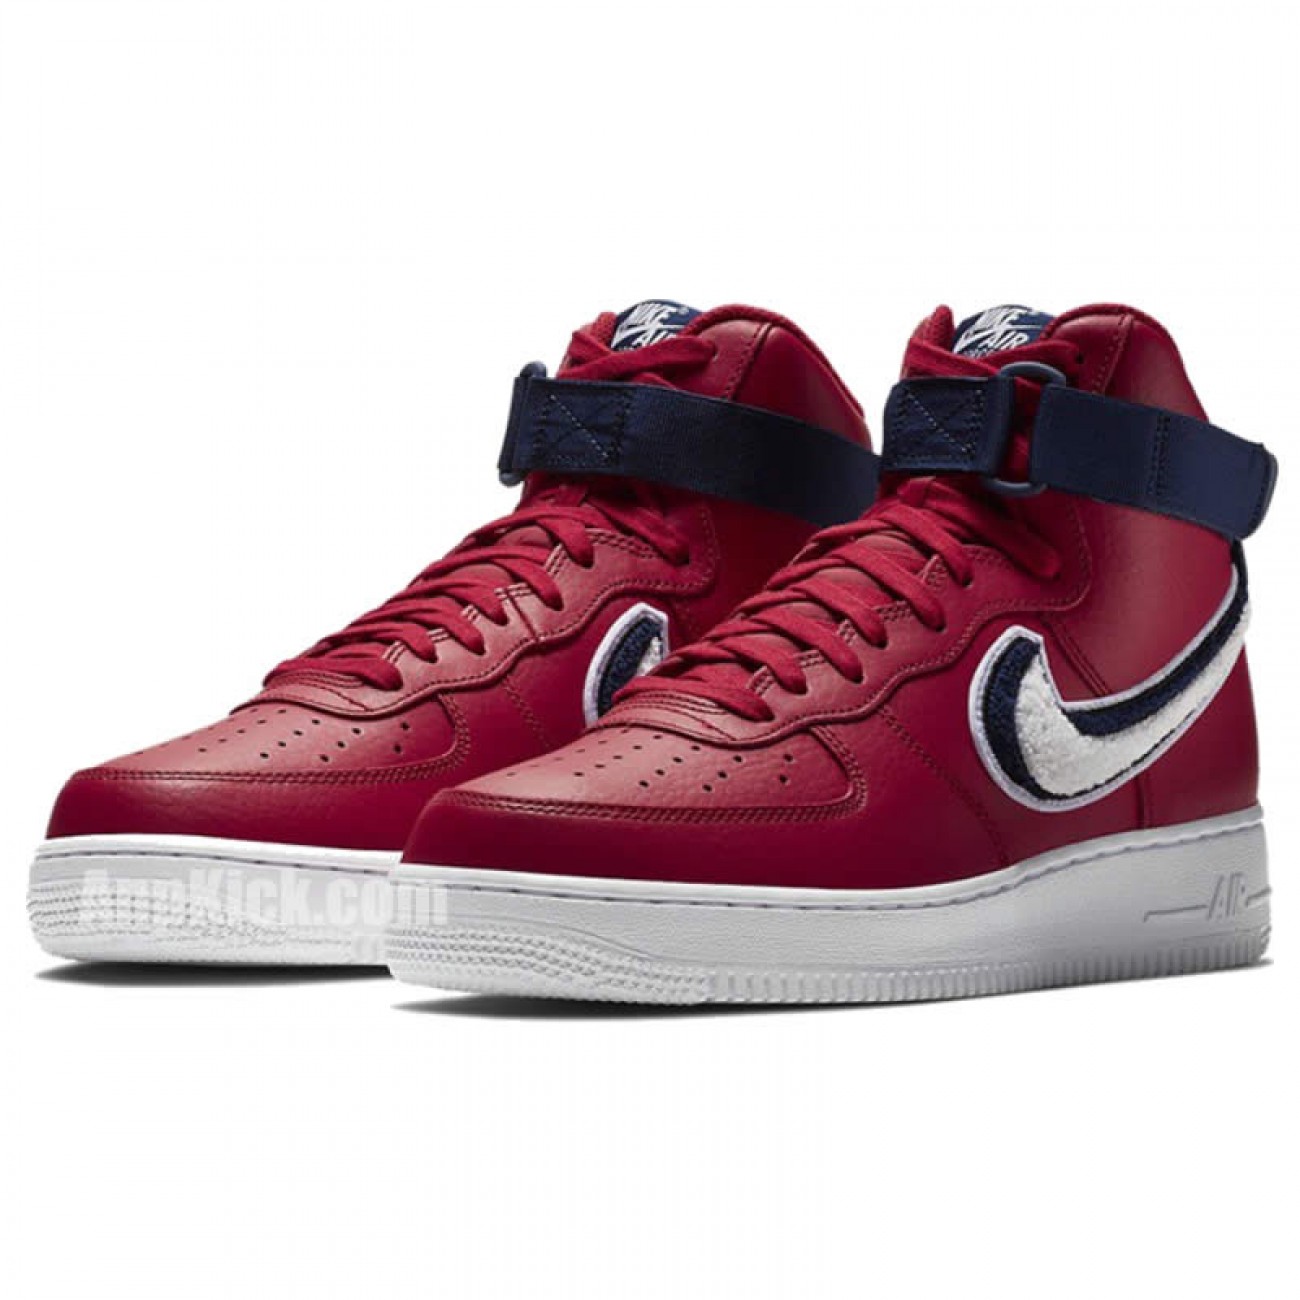 Nike Air Force 1 Red Blue High '07 LV8 Gym Red/White-Blue Void-White Shoes 806403-603